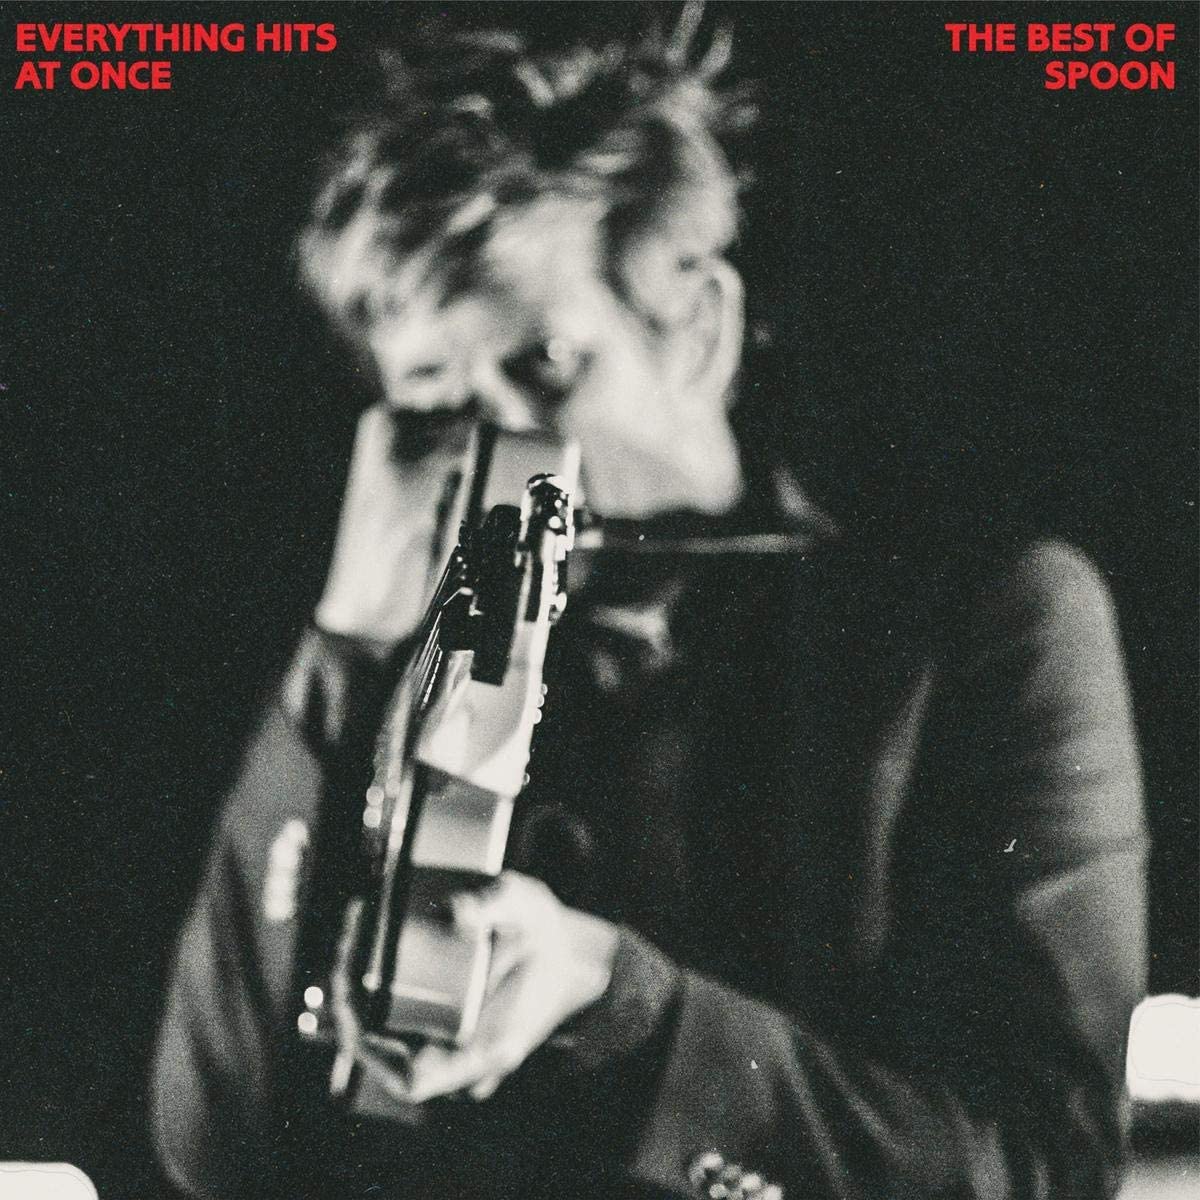 Spoon - Everything Hits at Once ( the best of )